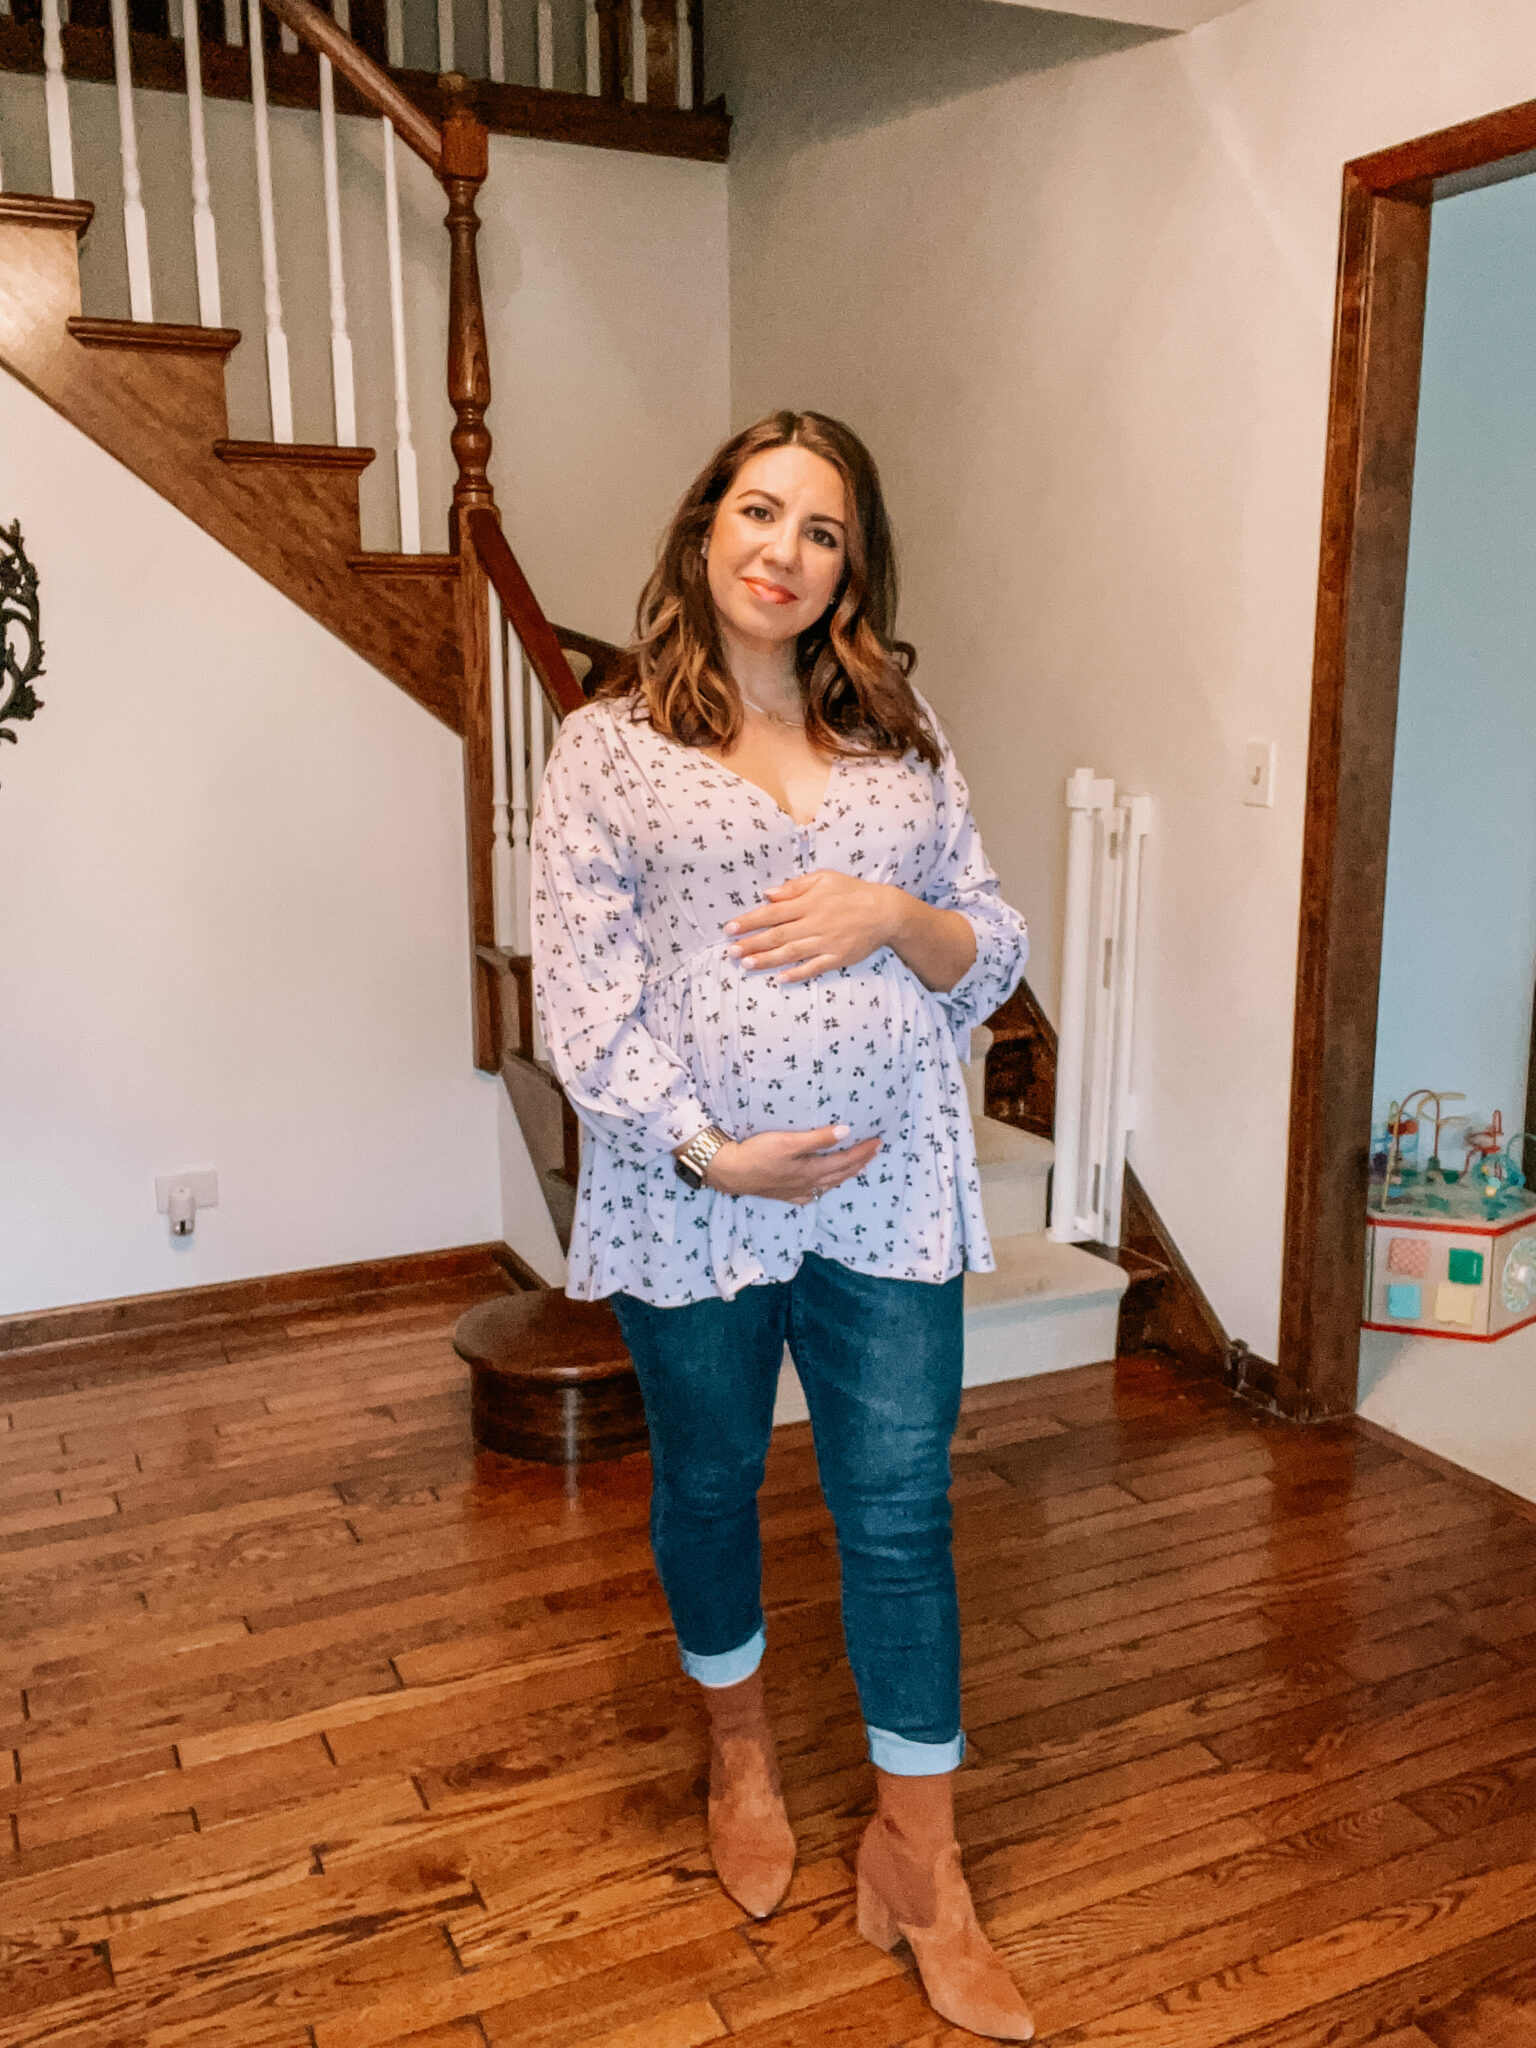 The Nines By Hatch maternity wear available at Target, and featured by top US mom fashion blogger, Glass of Glam